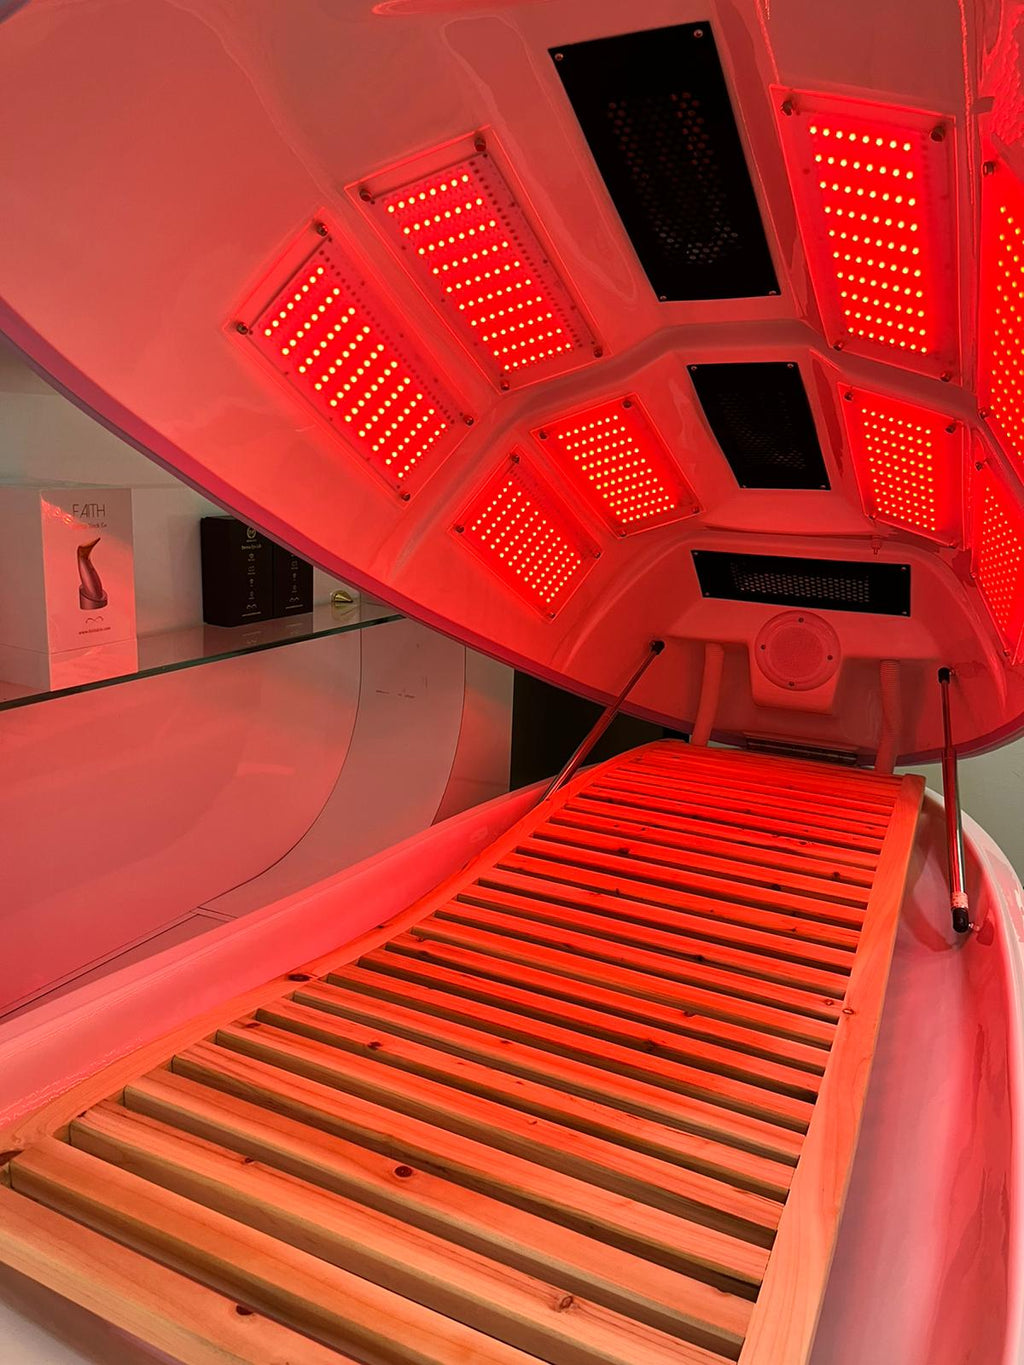 BODY TREATMENT LIGHT THERAPY